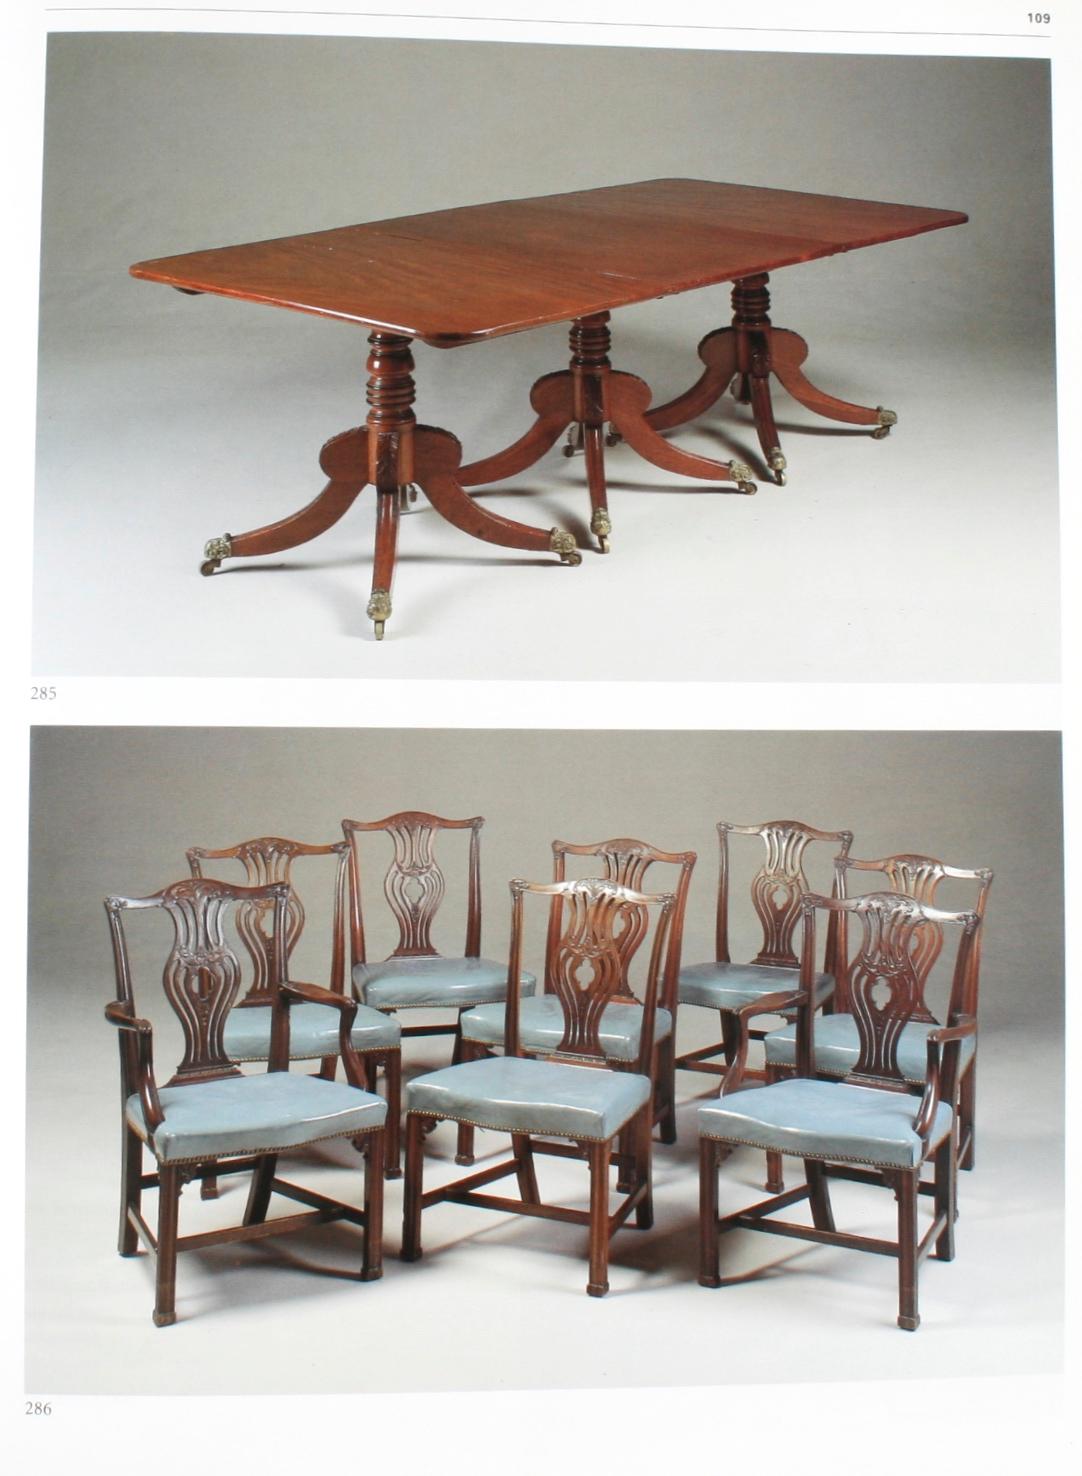 Sotheby's: English Furniture & Decorations, John L. Boonshaft Collection, 1998 2